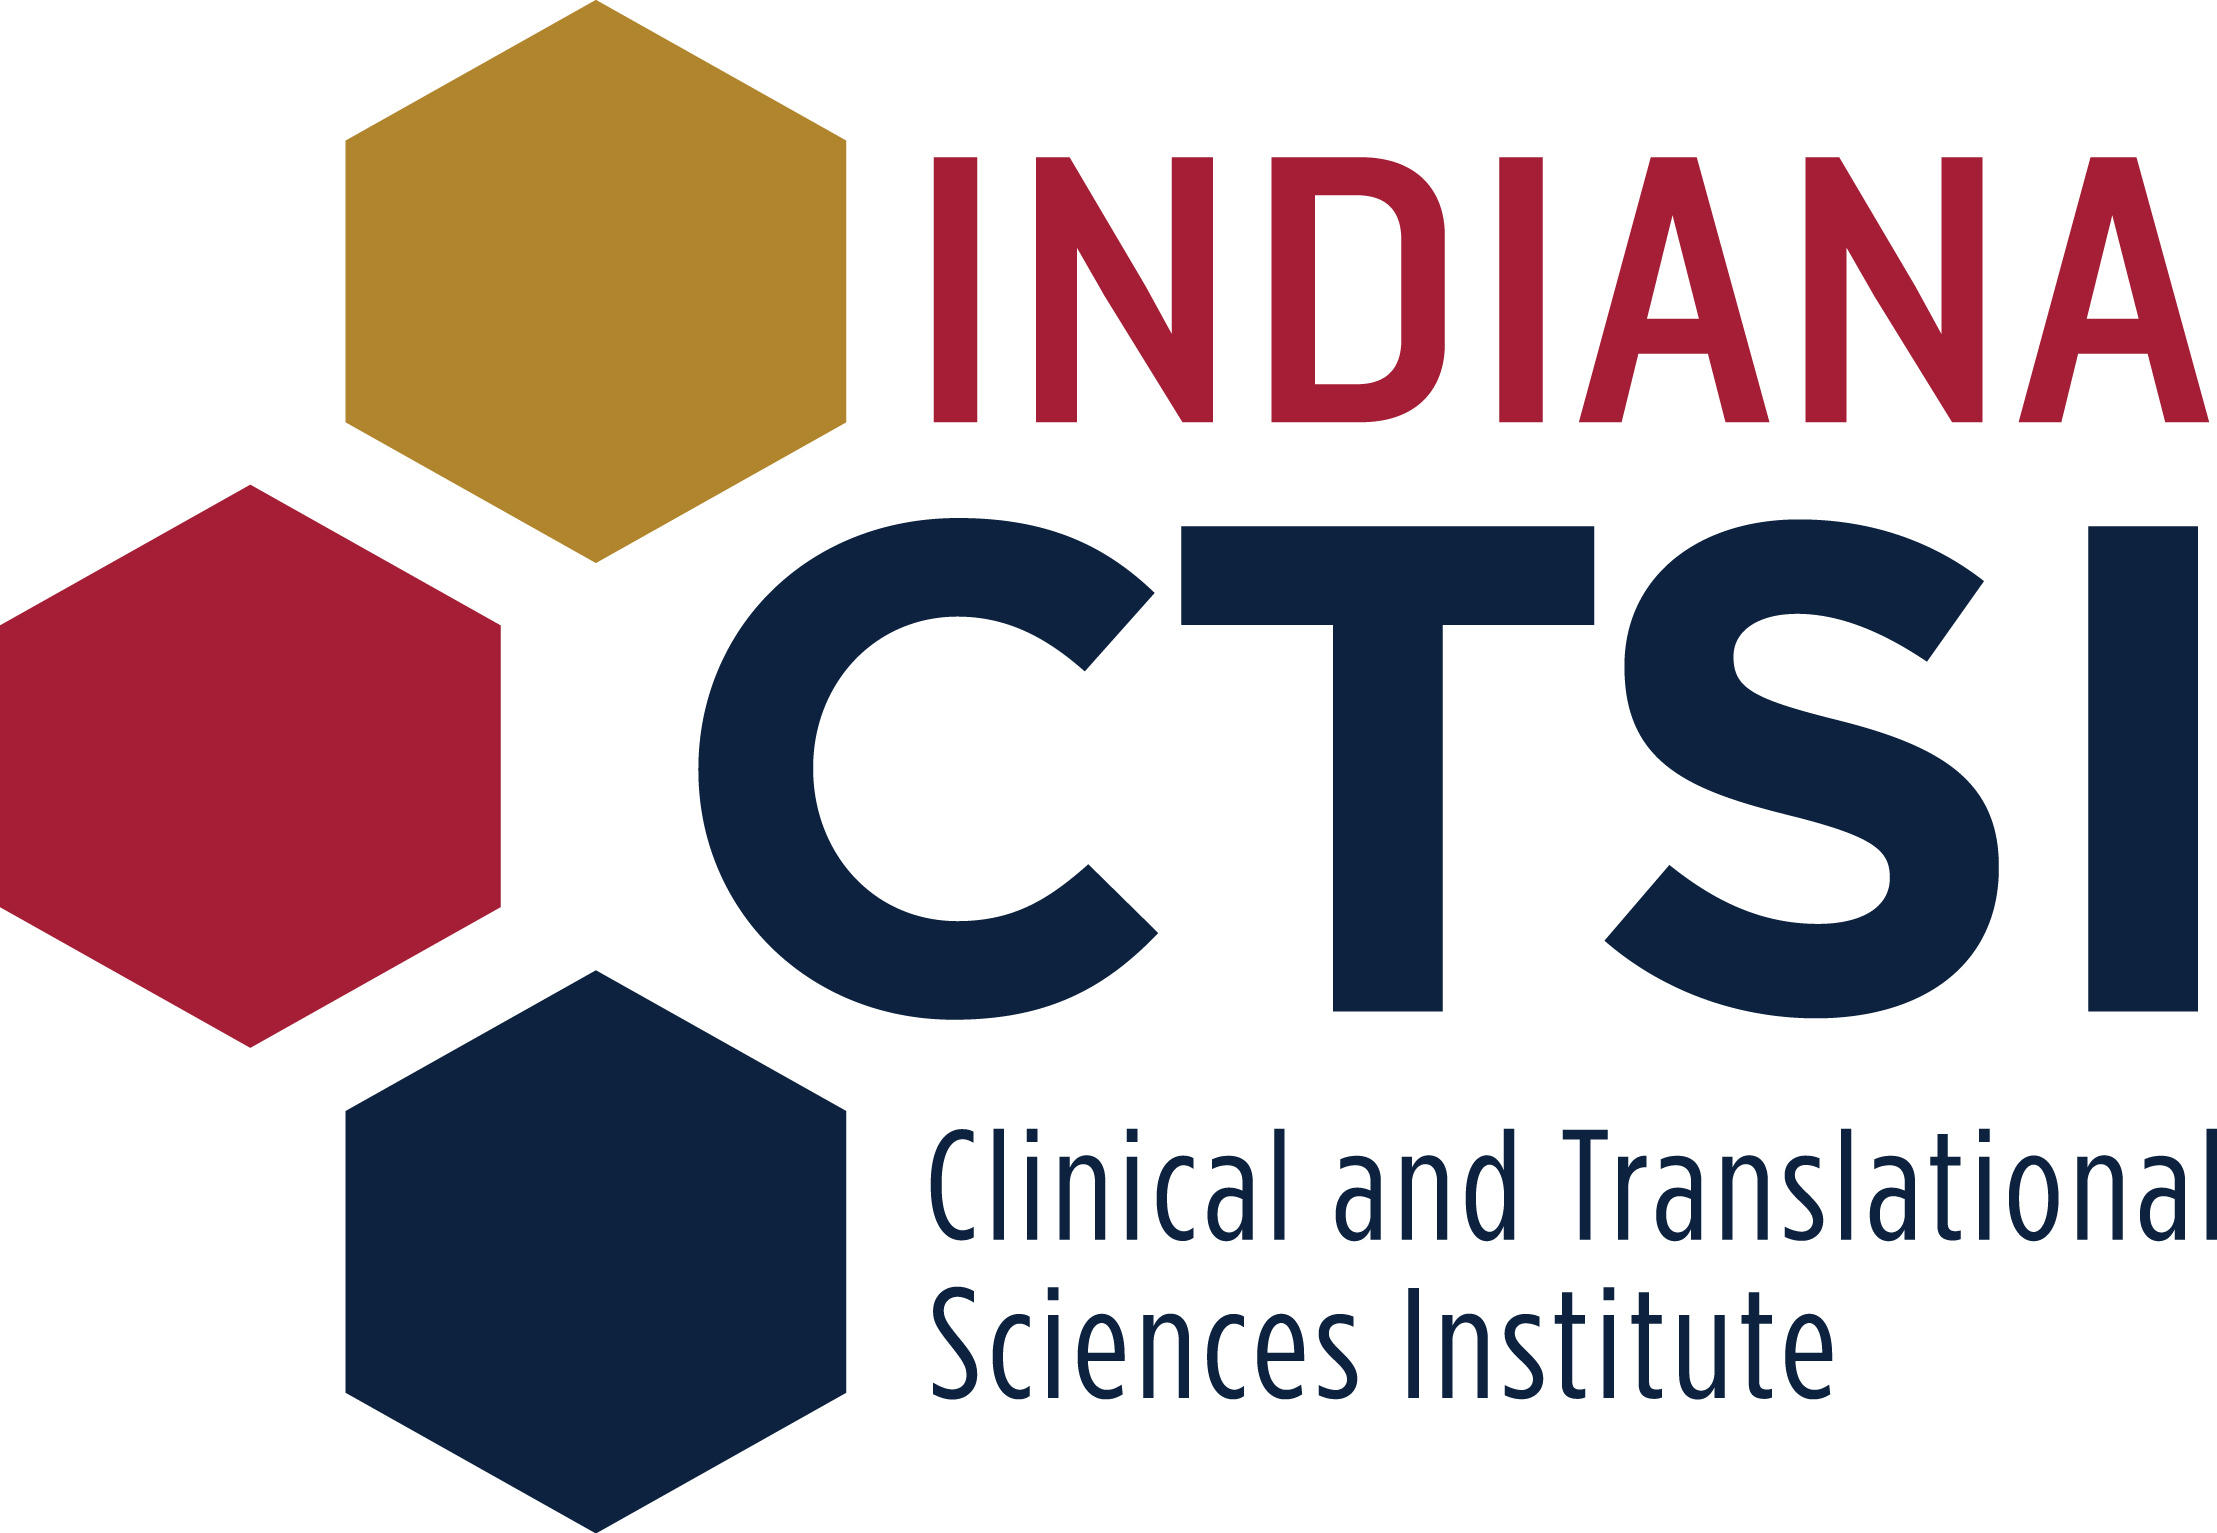 Indiana Clinical and Transnational Sciences Institute